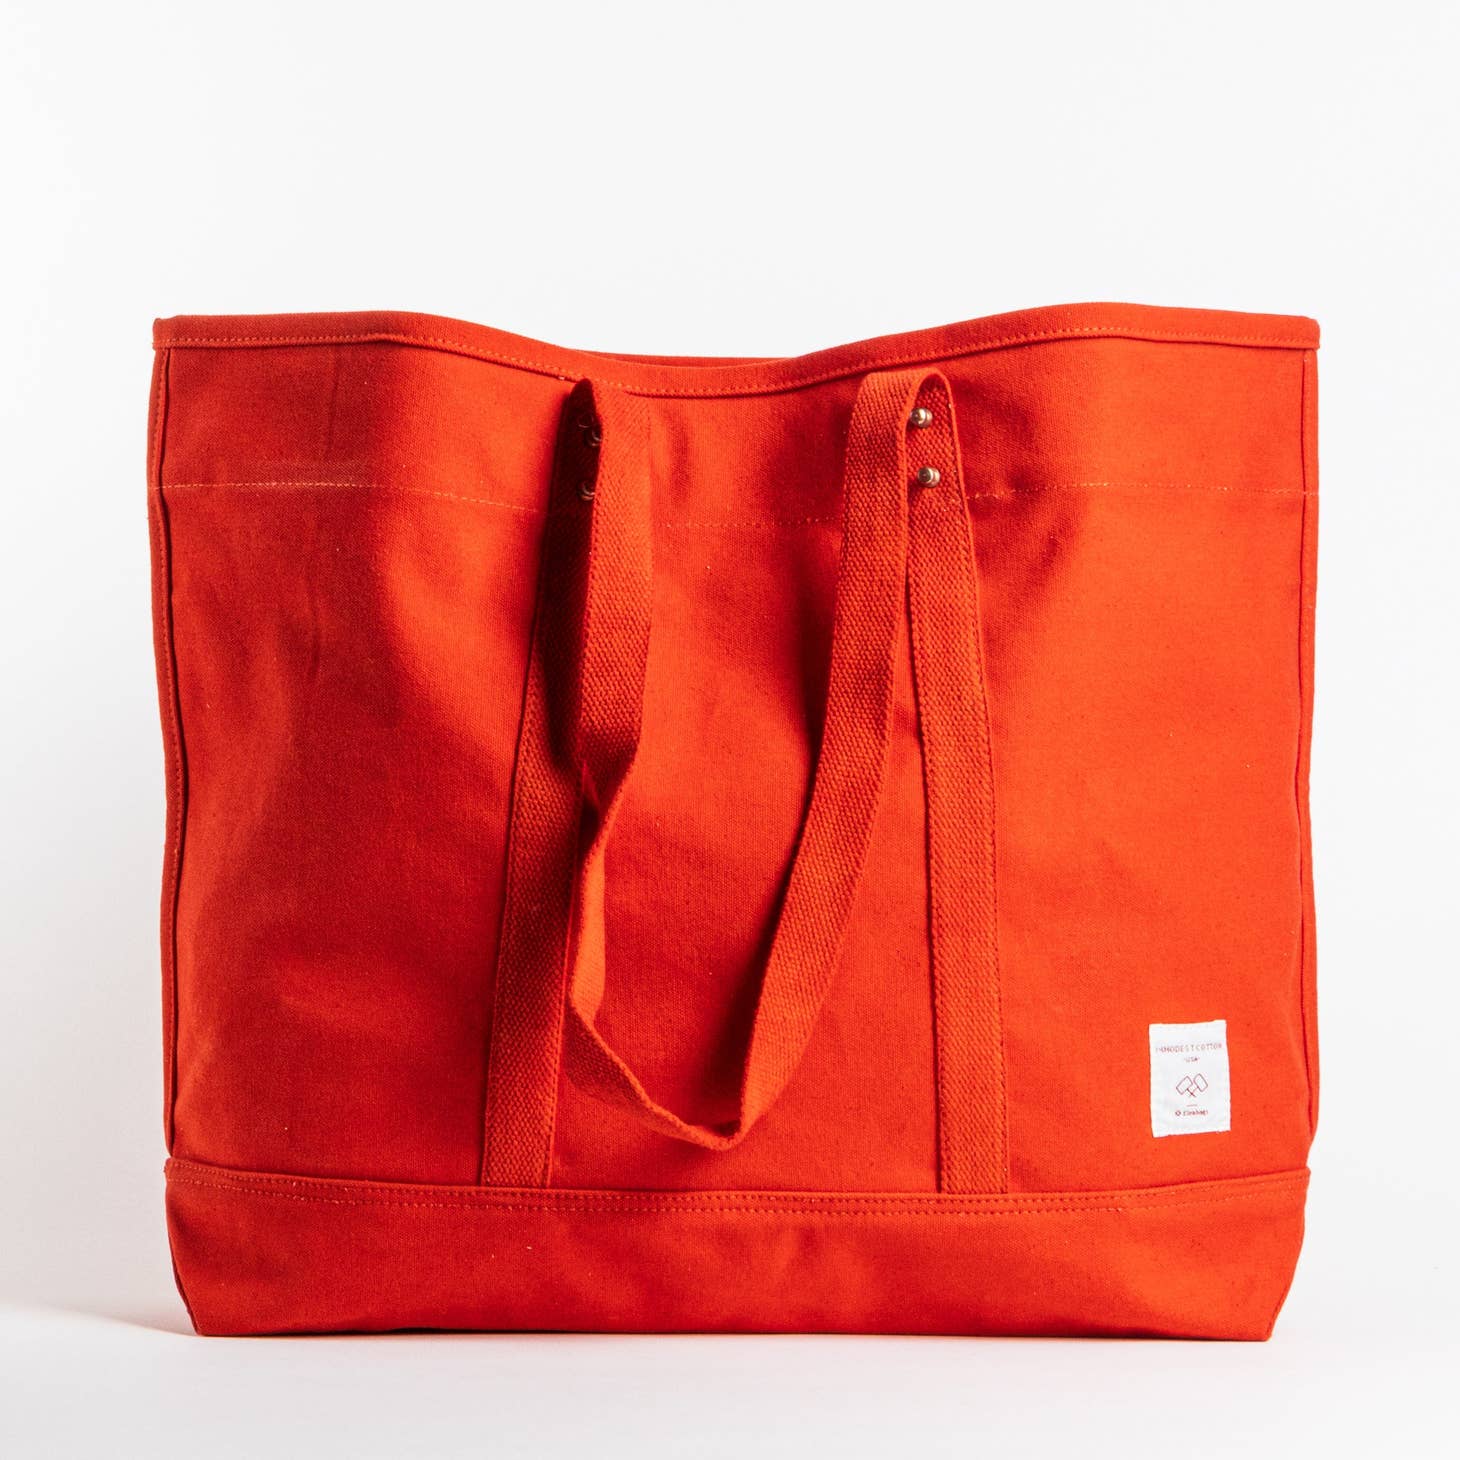 Immodest Cotton | Large East West Tote